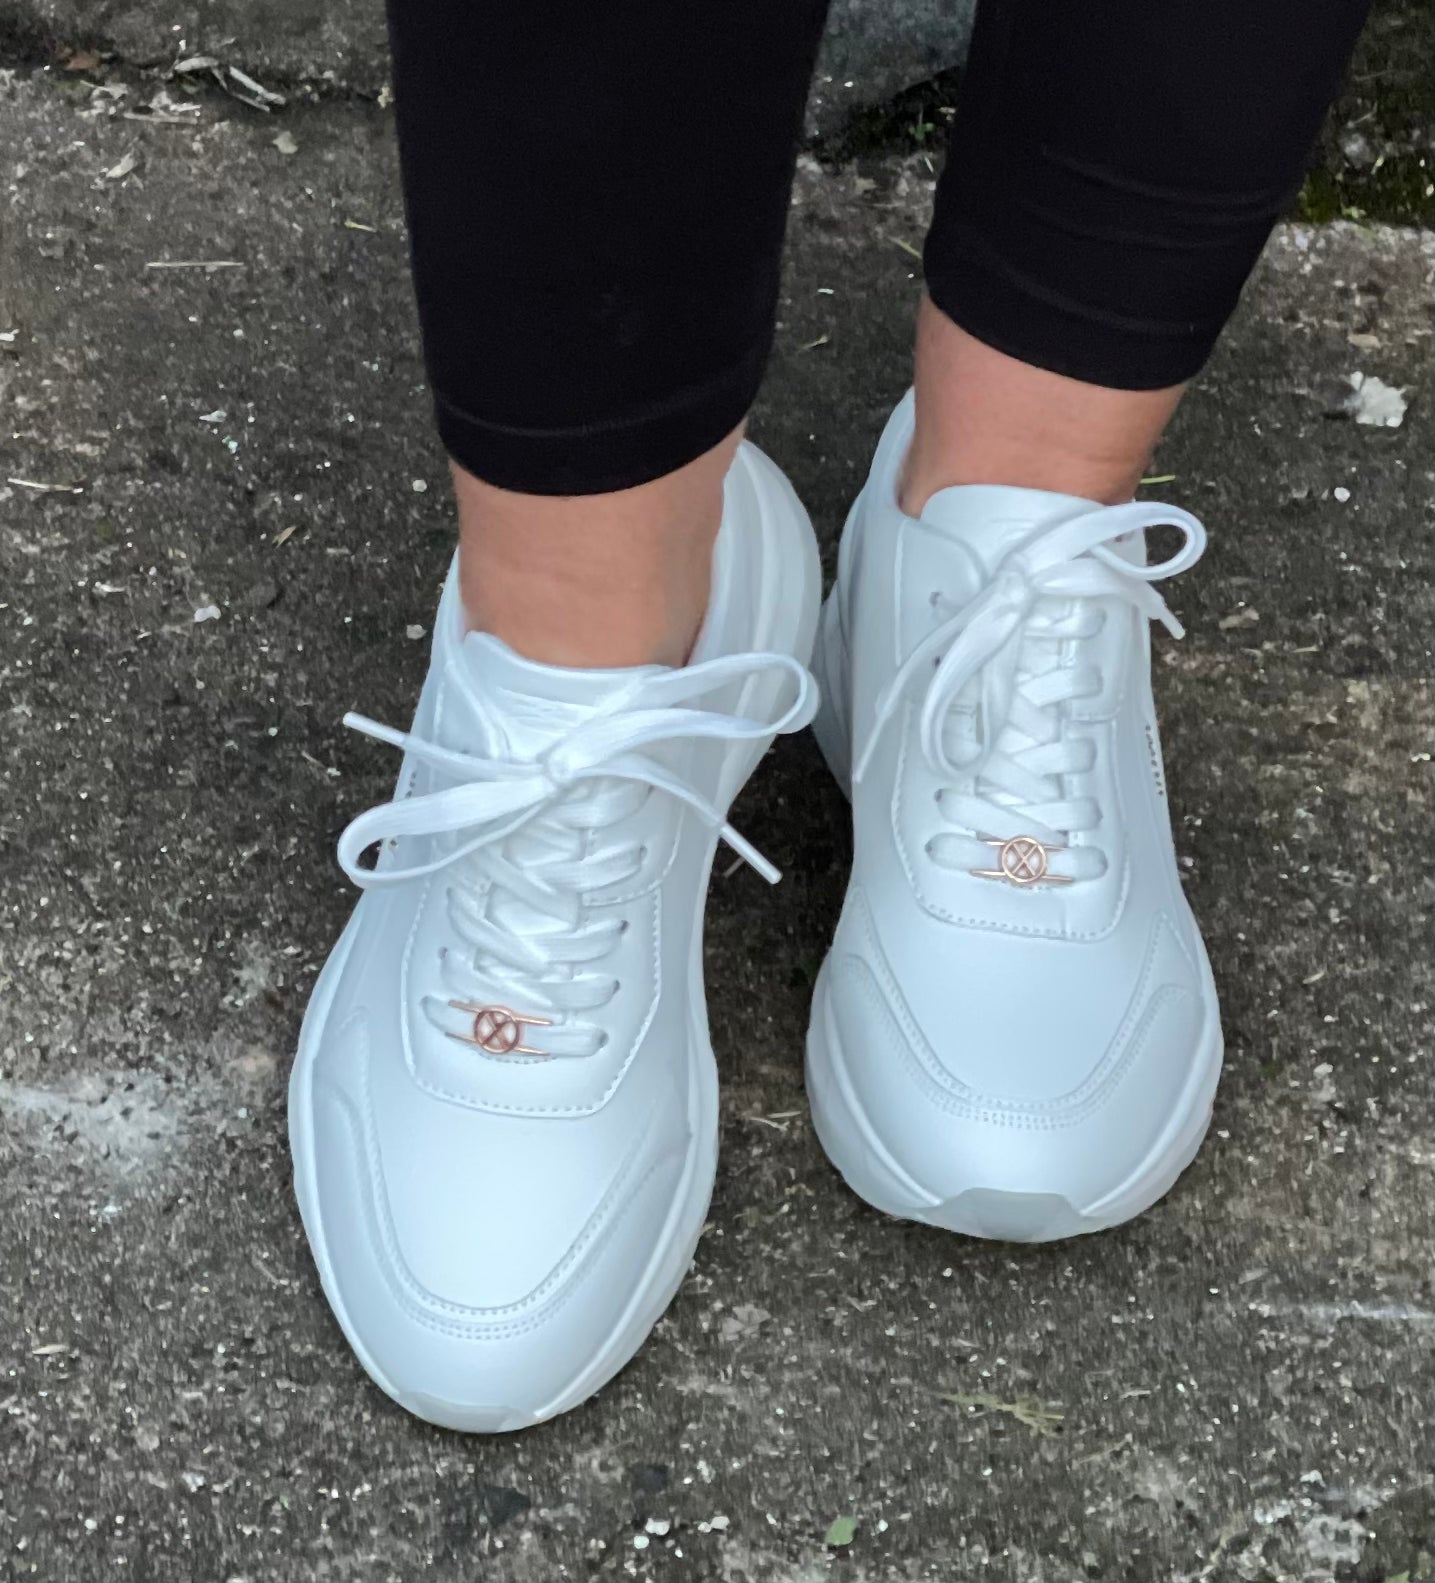 Tommy Bowe For Her - 'Jordon' Coconut Wedge Trainer